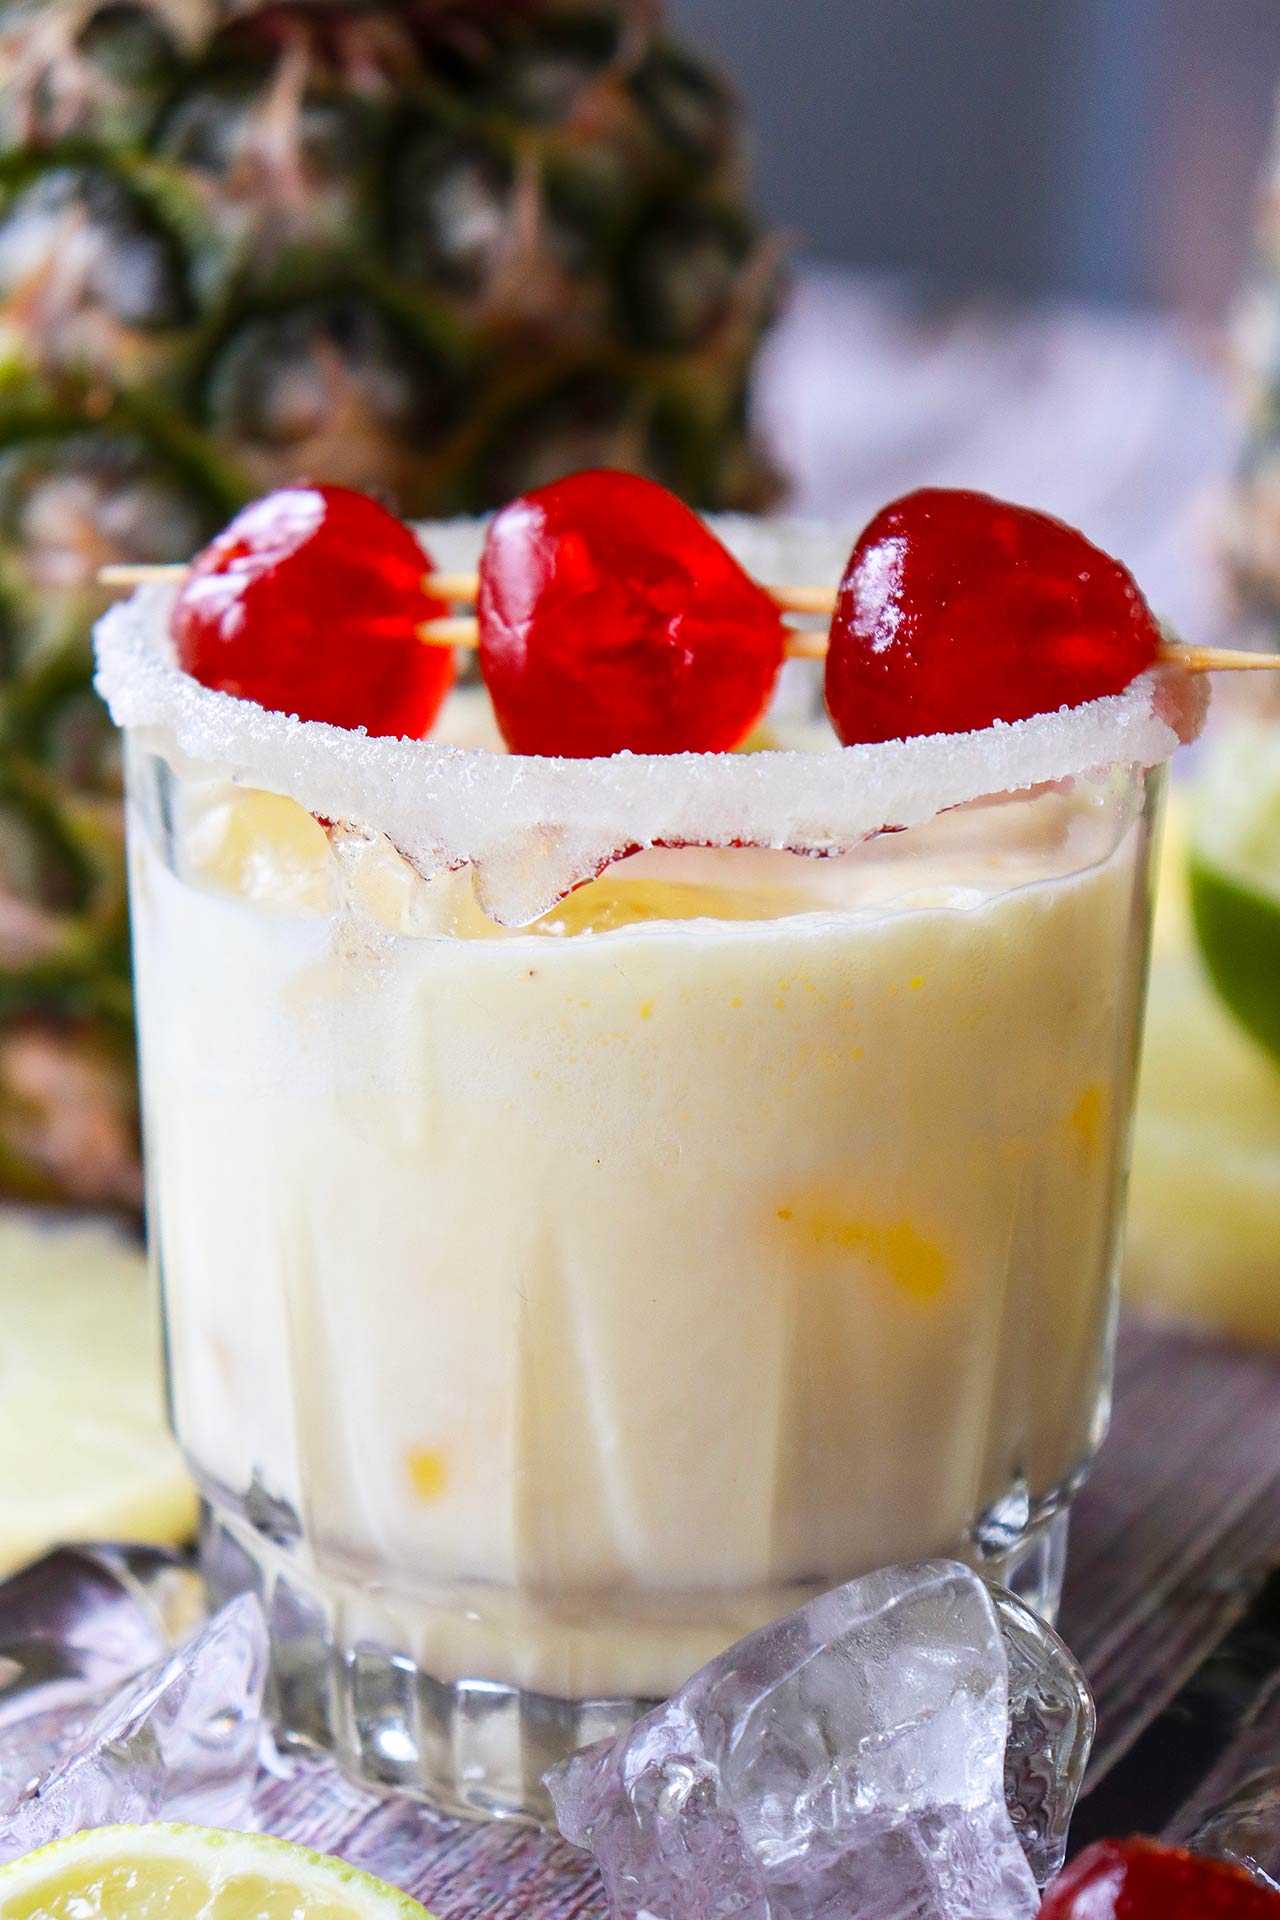 A Virgin Pina Colada in a glass with three cherries on a toothpick laid across the top of the glass.